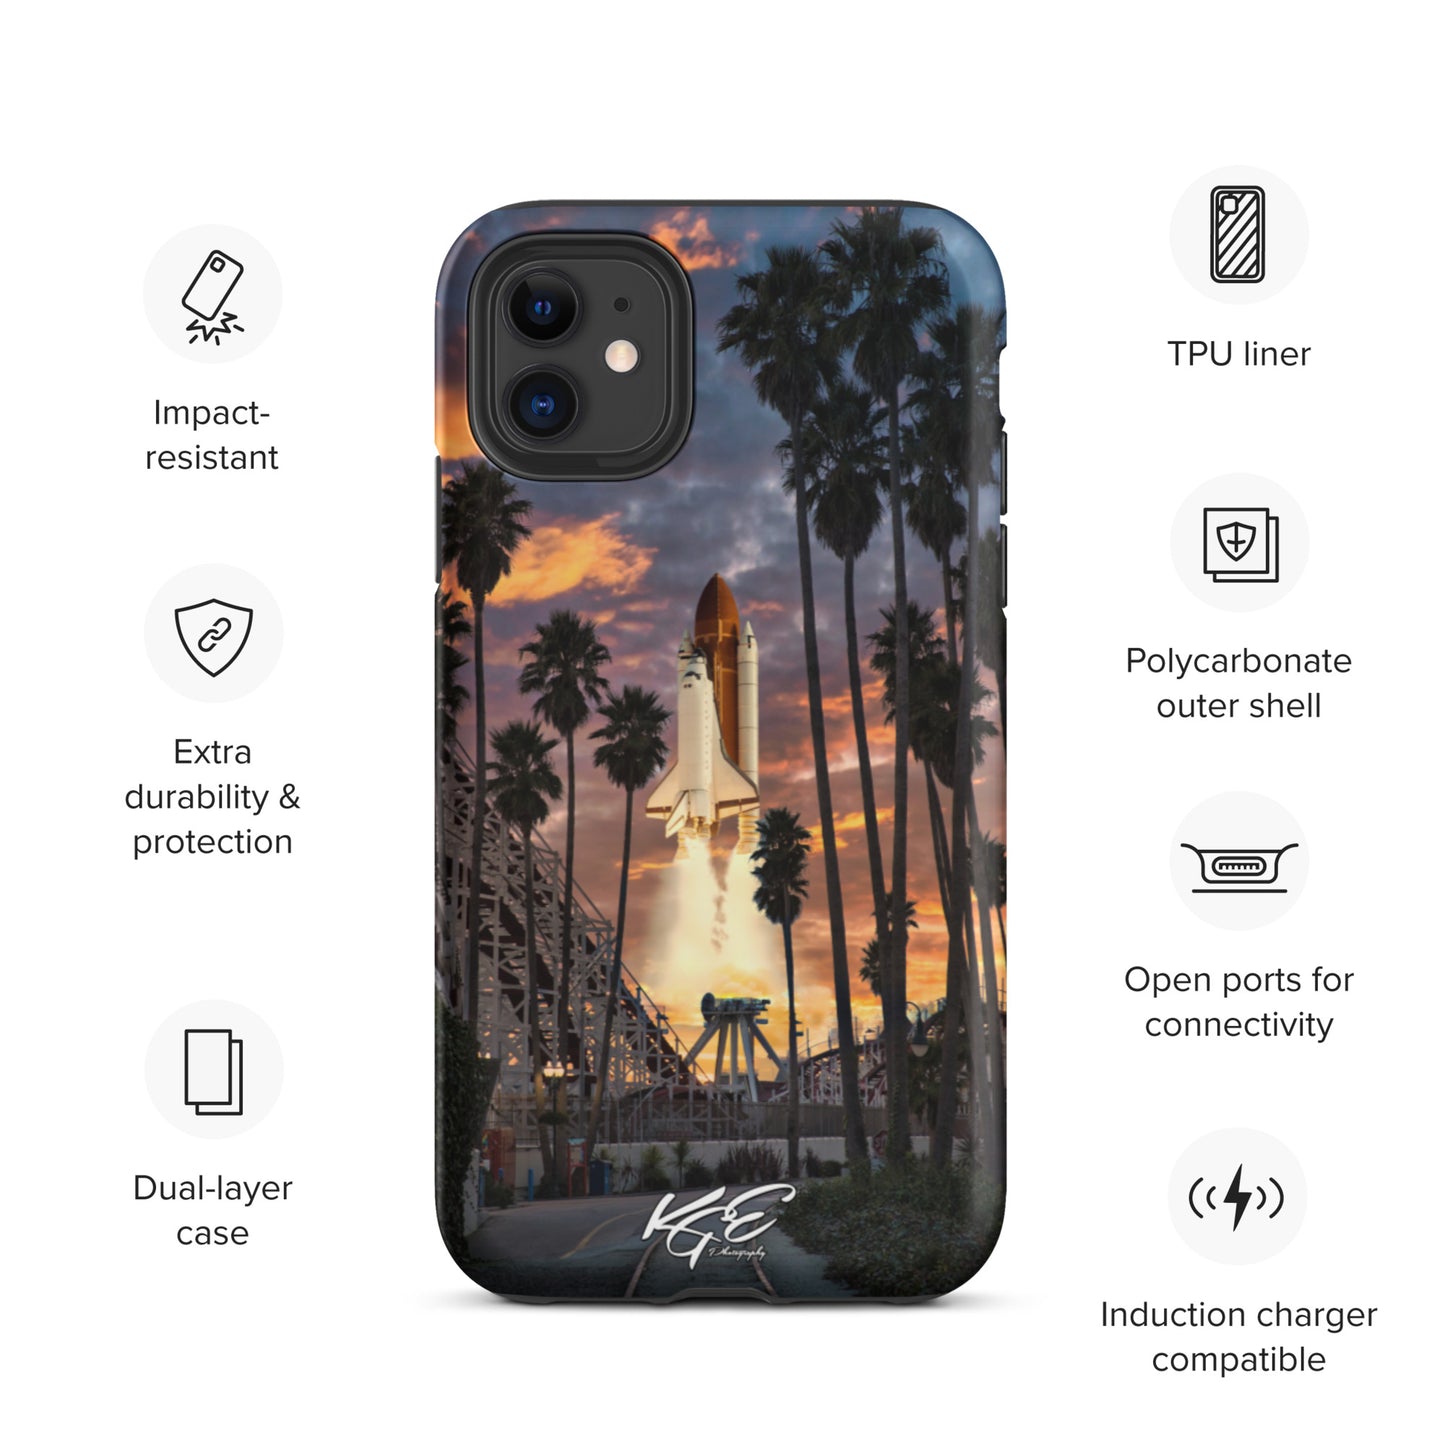 KGE Photography - Space Shuttle Imagination Tough iPhone case